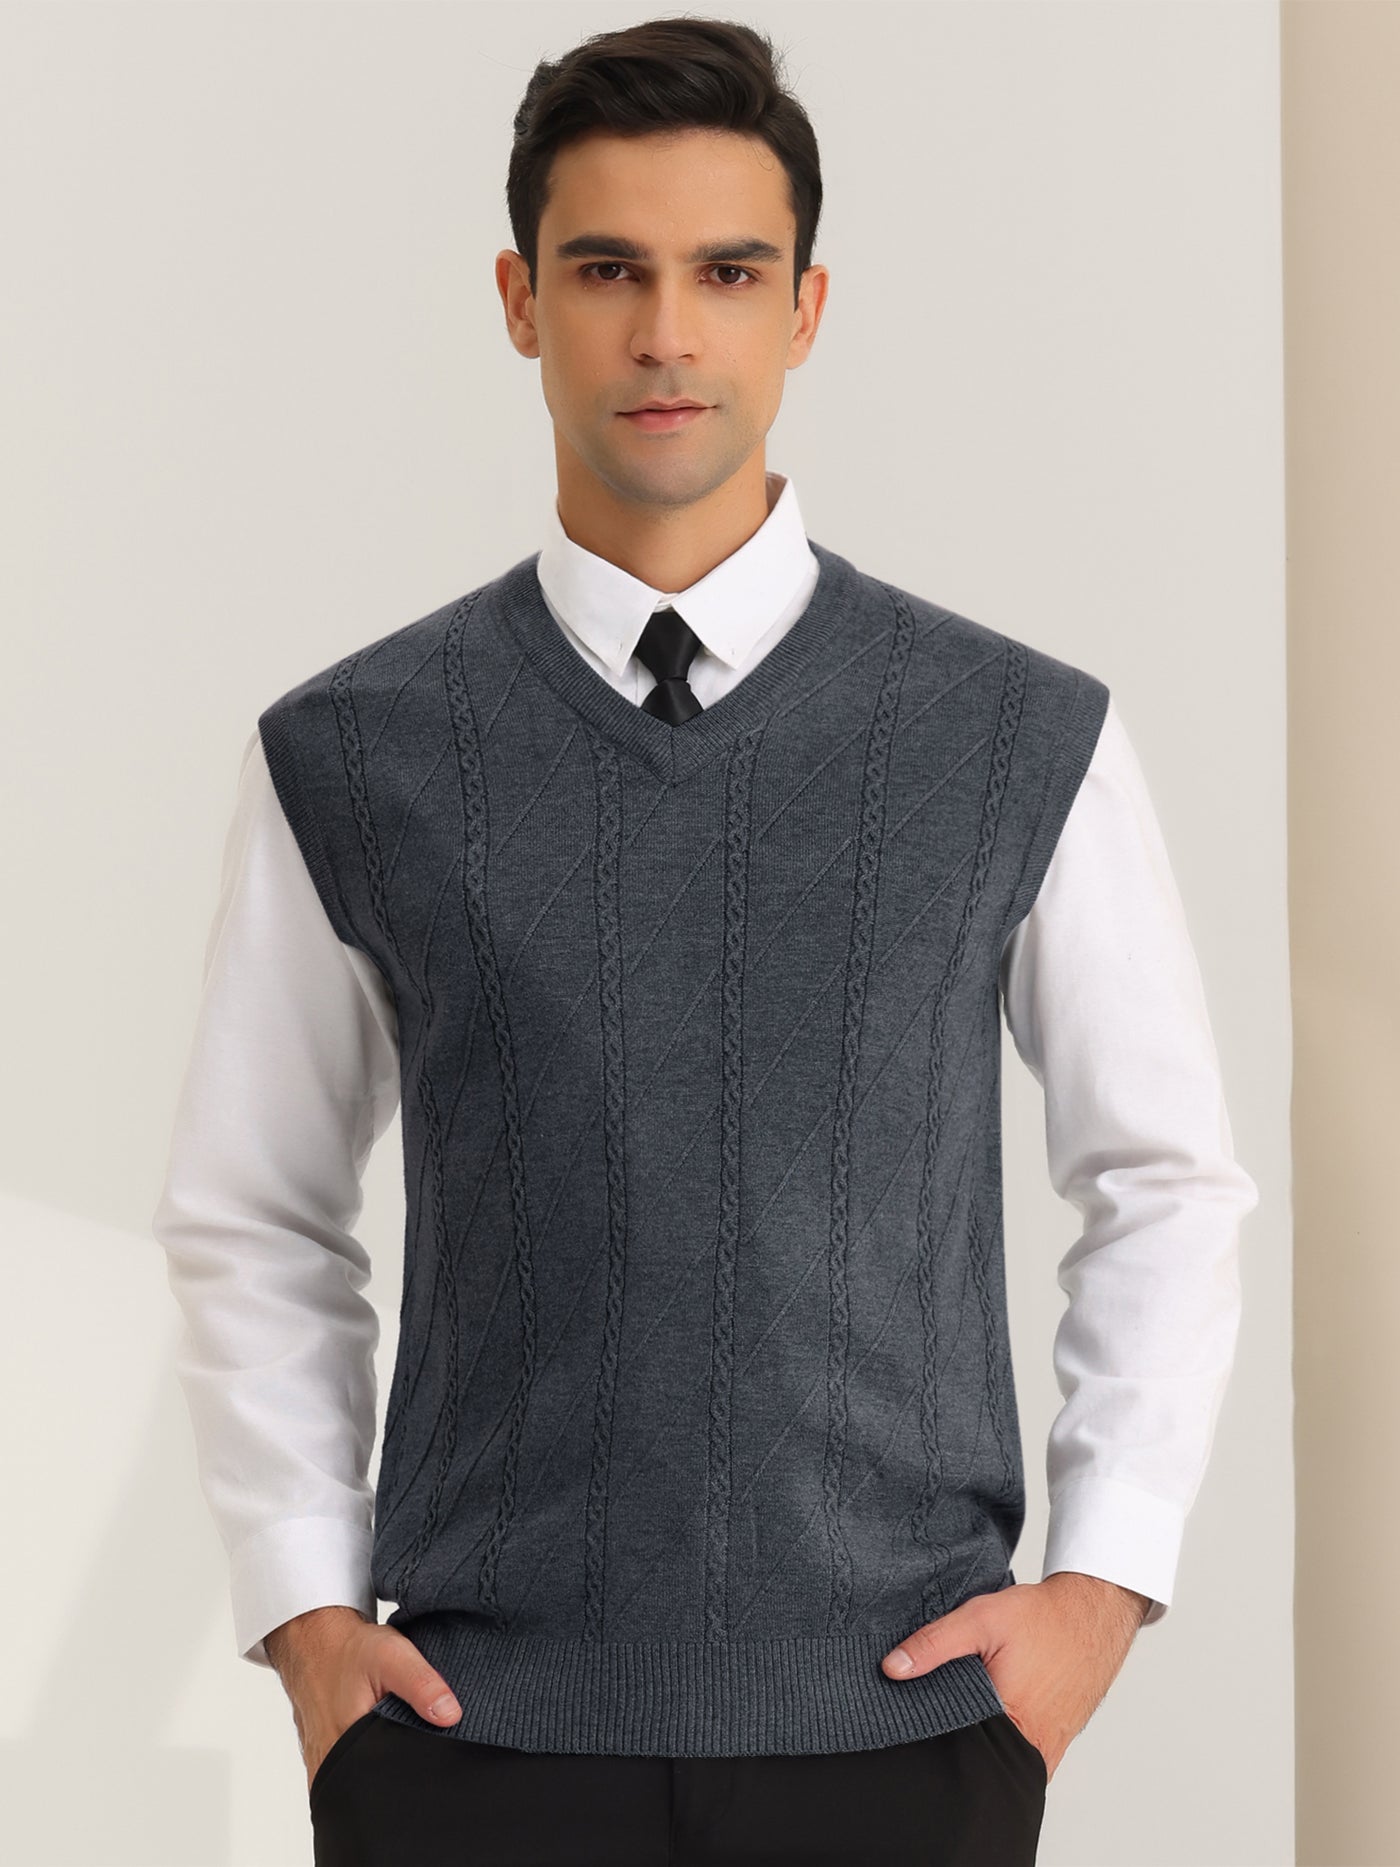 Bublédon Men's Cable Knitted Slim Fit V-Neck Sleeveless Pullover Sweater Vest